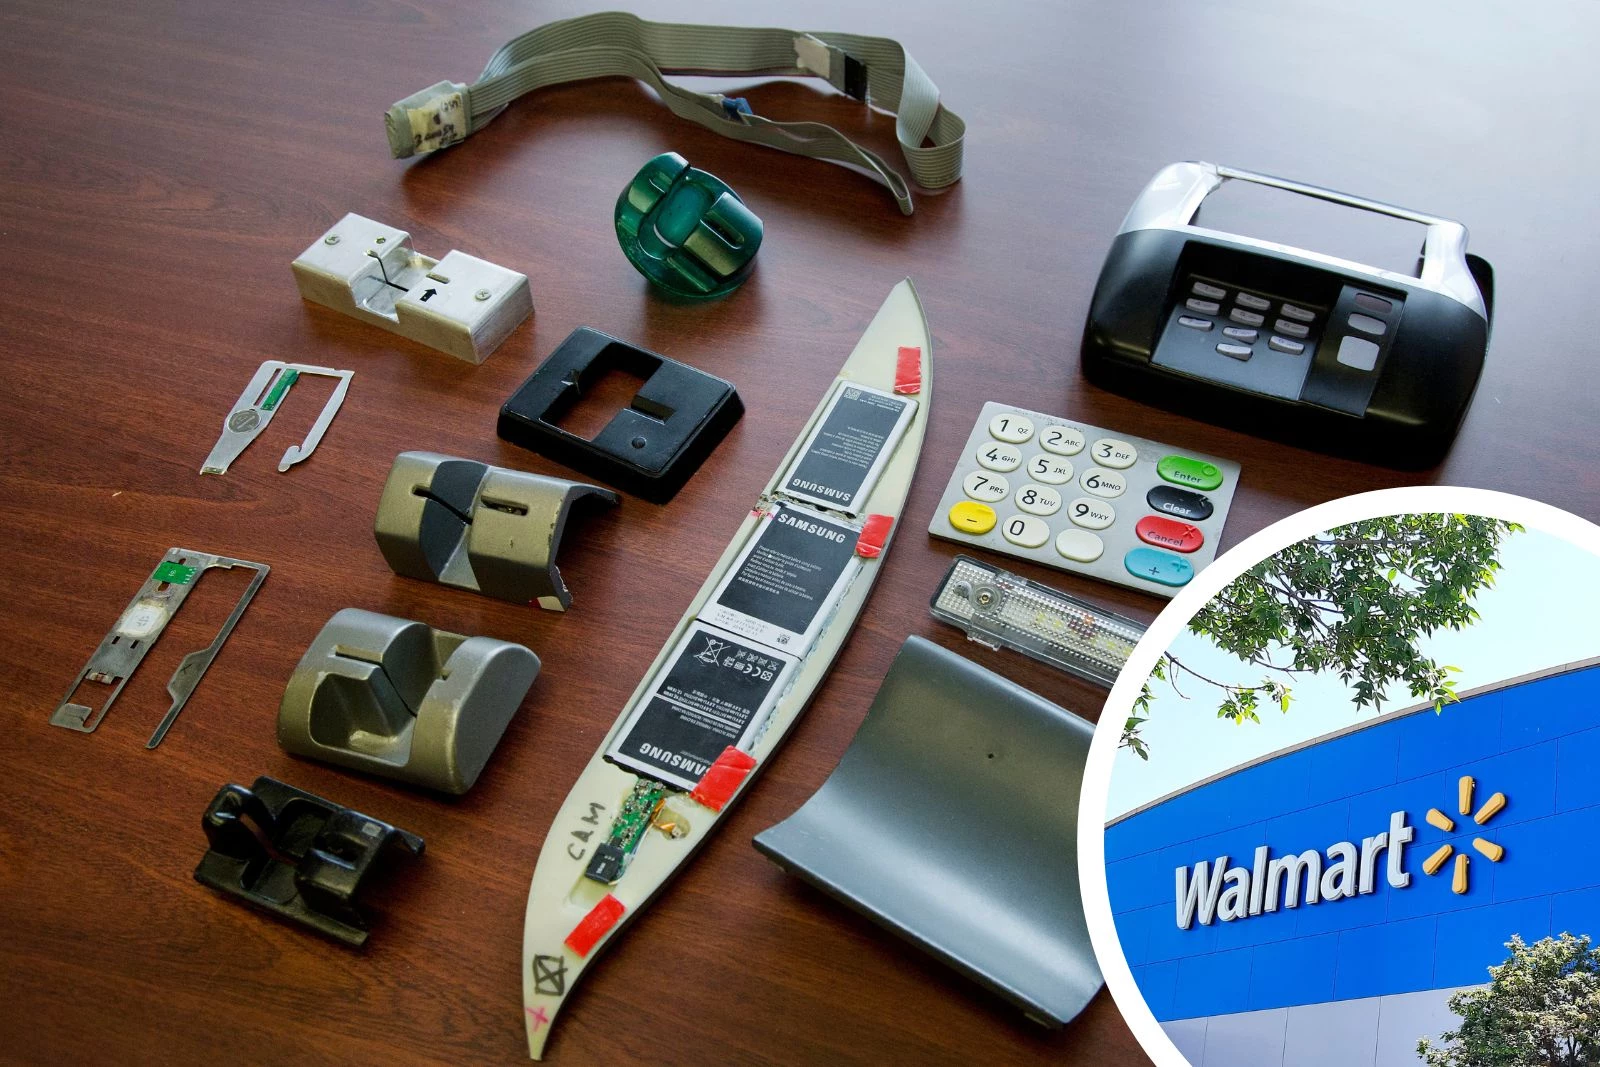 Walmart in Bayonne, tools used to skim information from credit cards